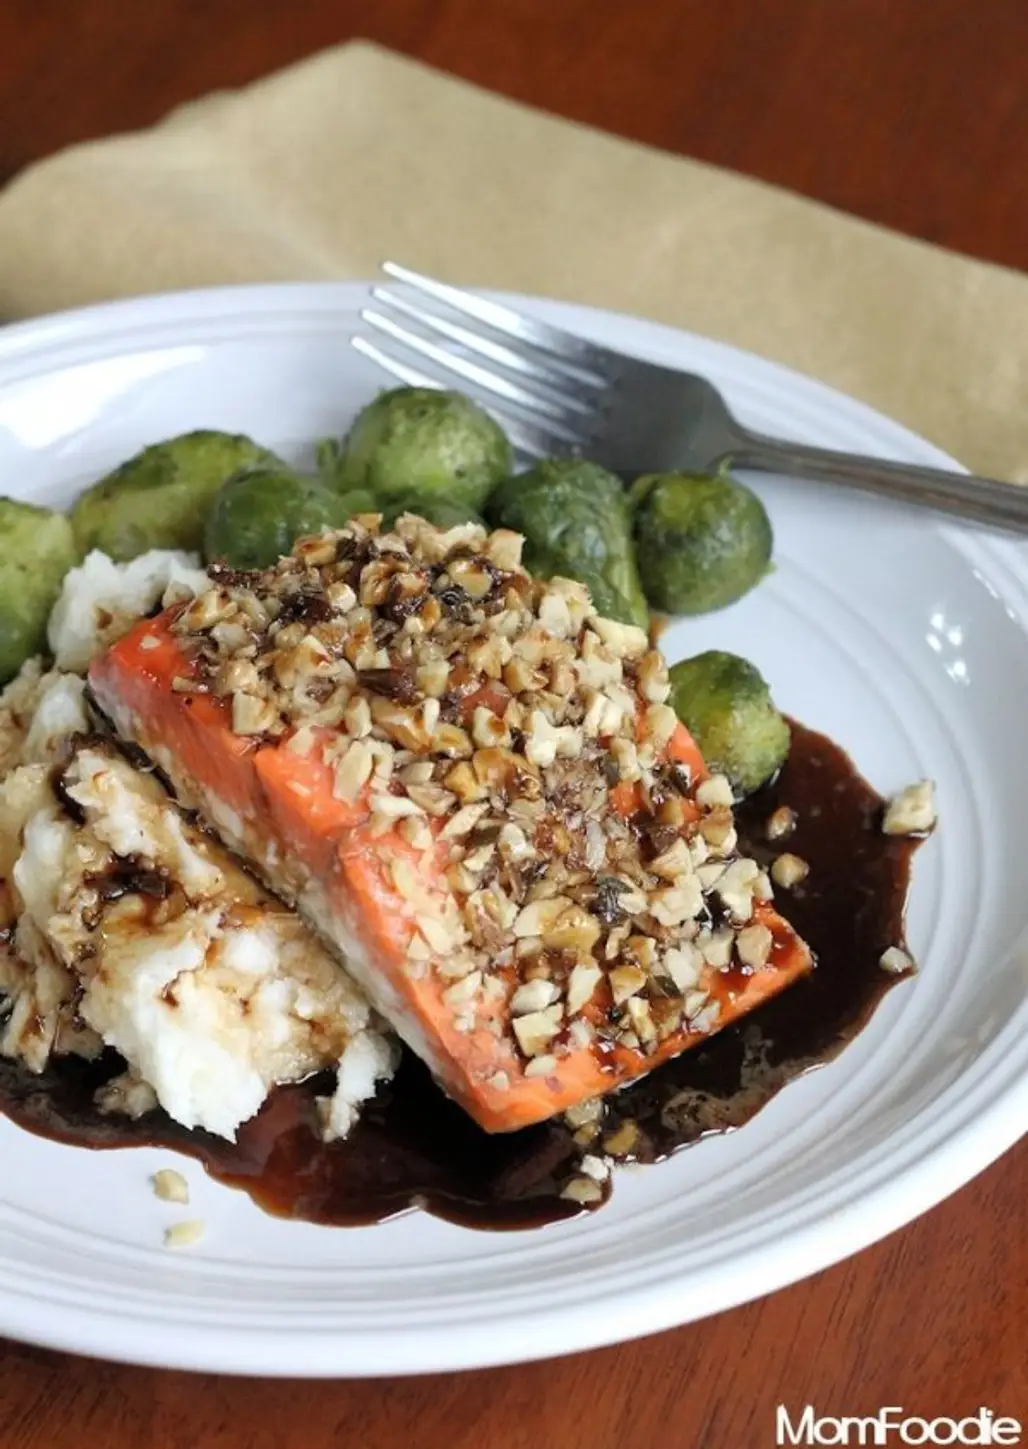 Walnut Crusted Salmon with Guinness Reduction